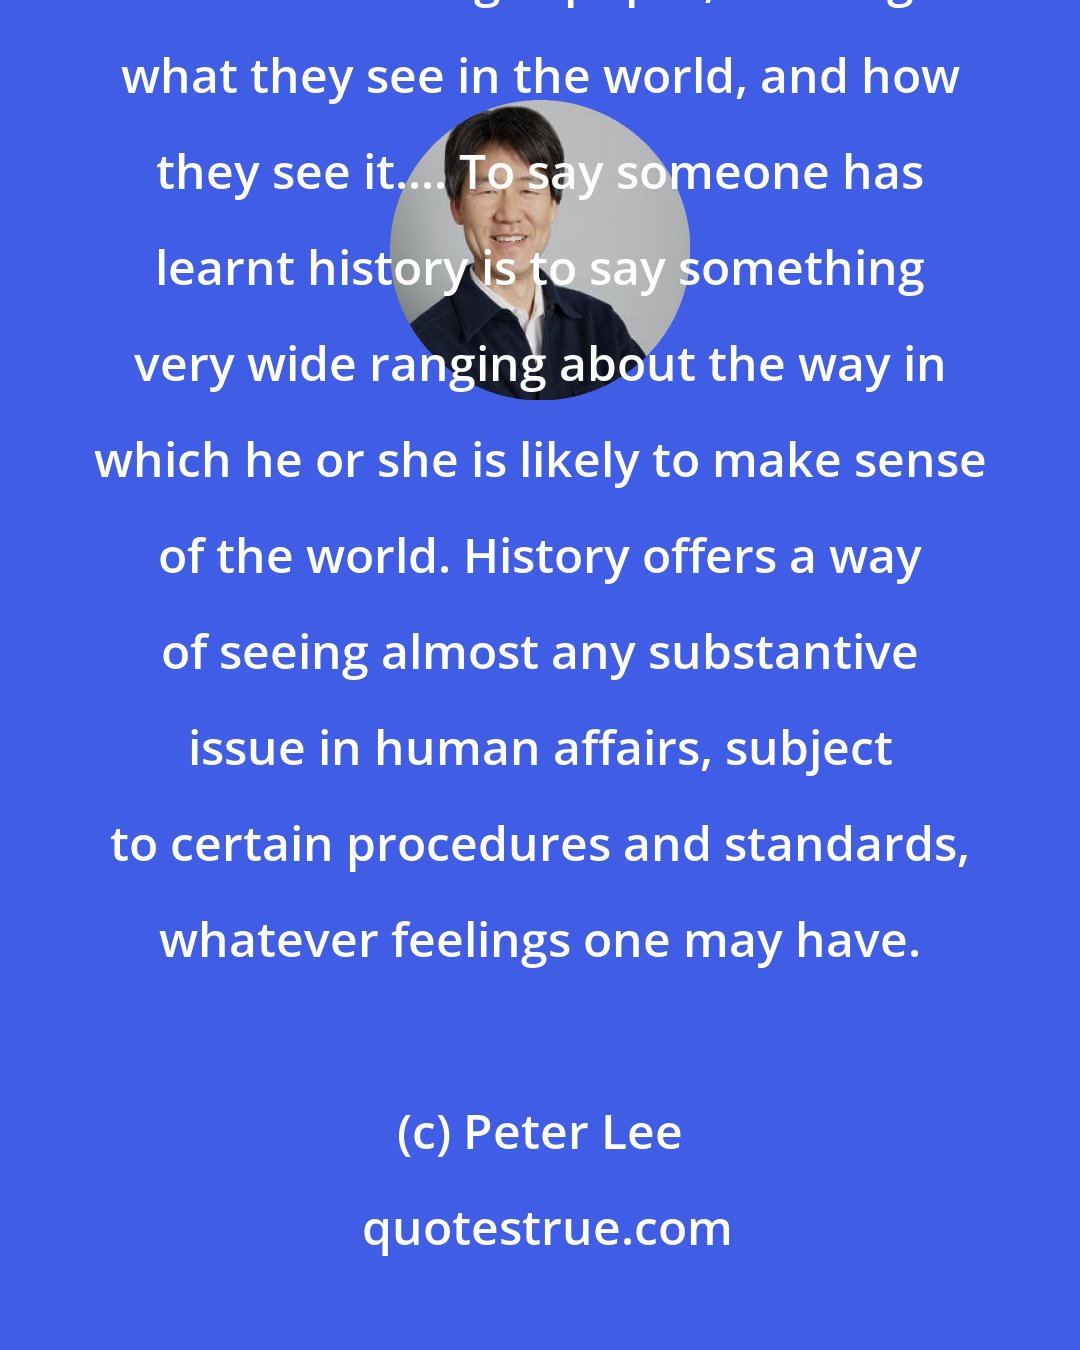 Peter Lee: The reason for teaching history is not that it changes society, but that it changes pupils; it changes what they see in the world, and how they see it.... To say someone has learnt history is to say something very wide ranging about the way in which he or she is likely to make sense of the world. History offers a way of seeing almost any substantive issue in human affairs, subject to certain procedures and standards, whatever feelings one may have.